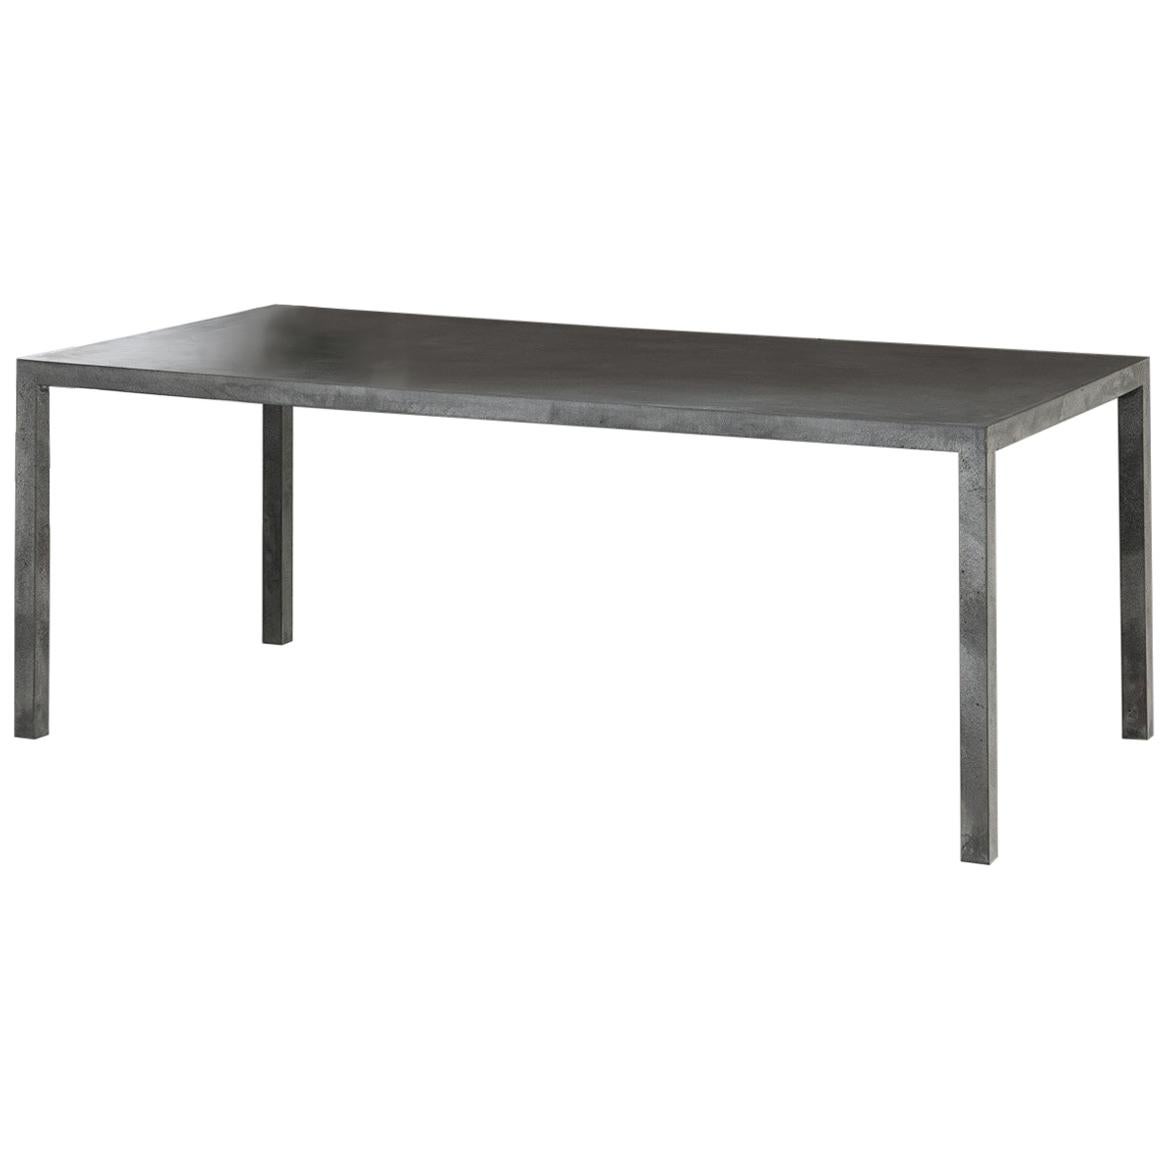 21St Century 50MM Dining Table - Single Cast of Concrete 100% handmade in Italy